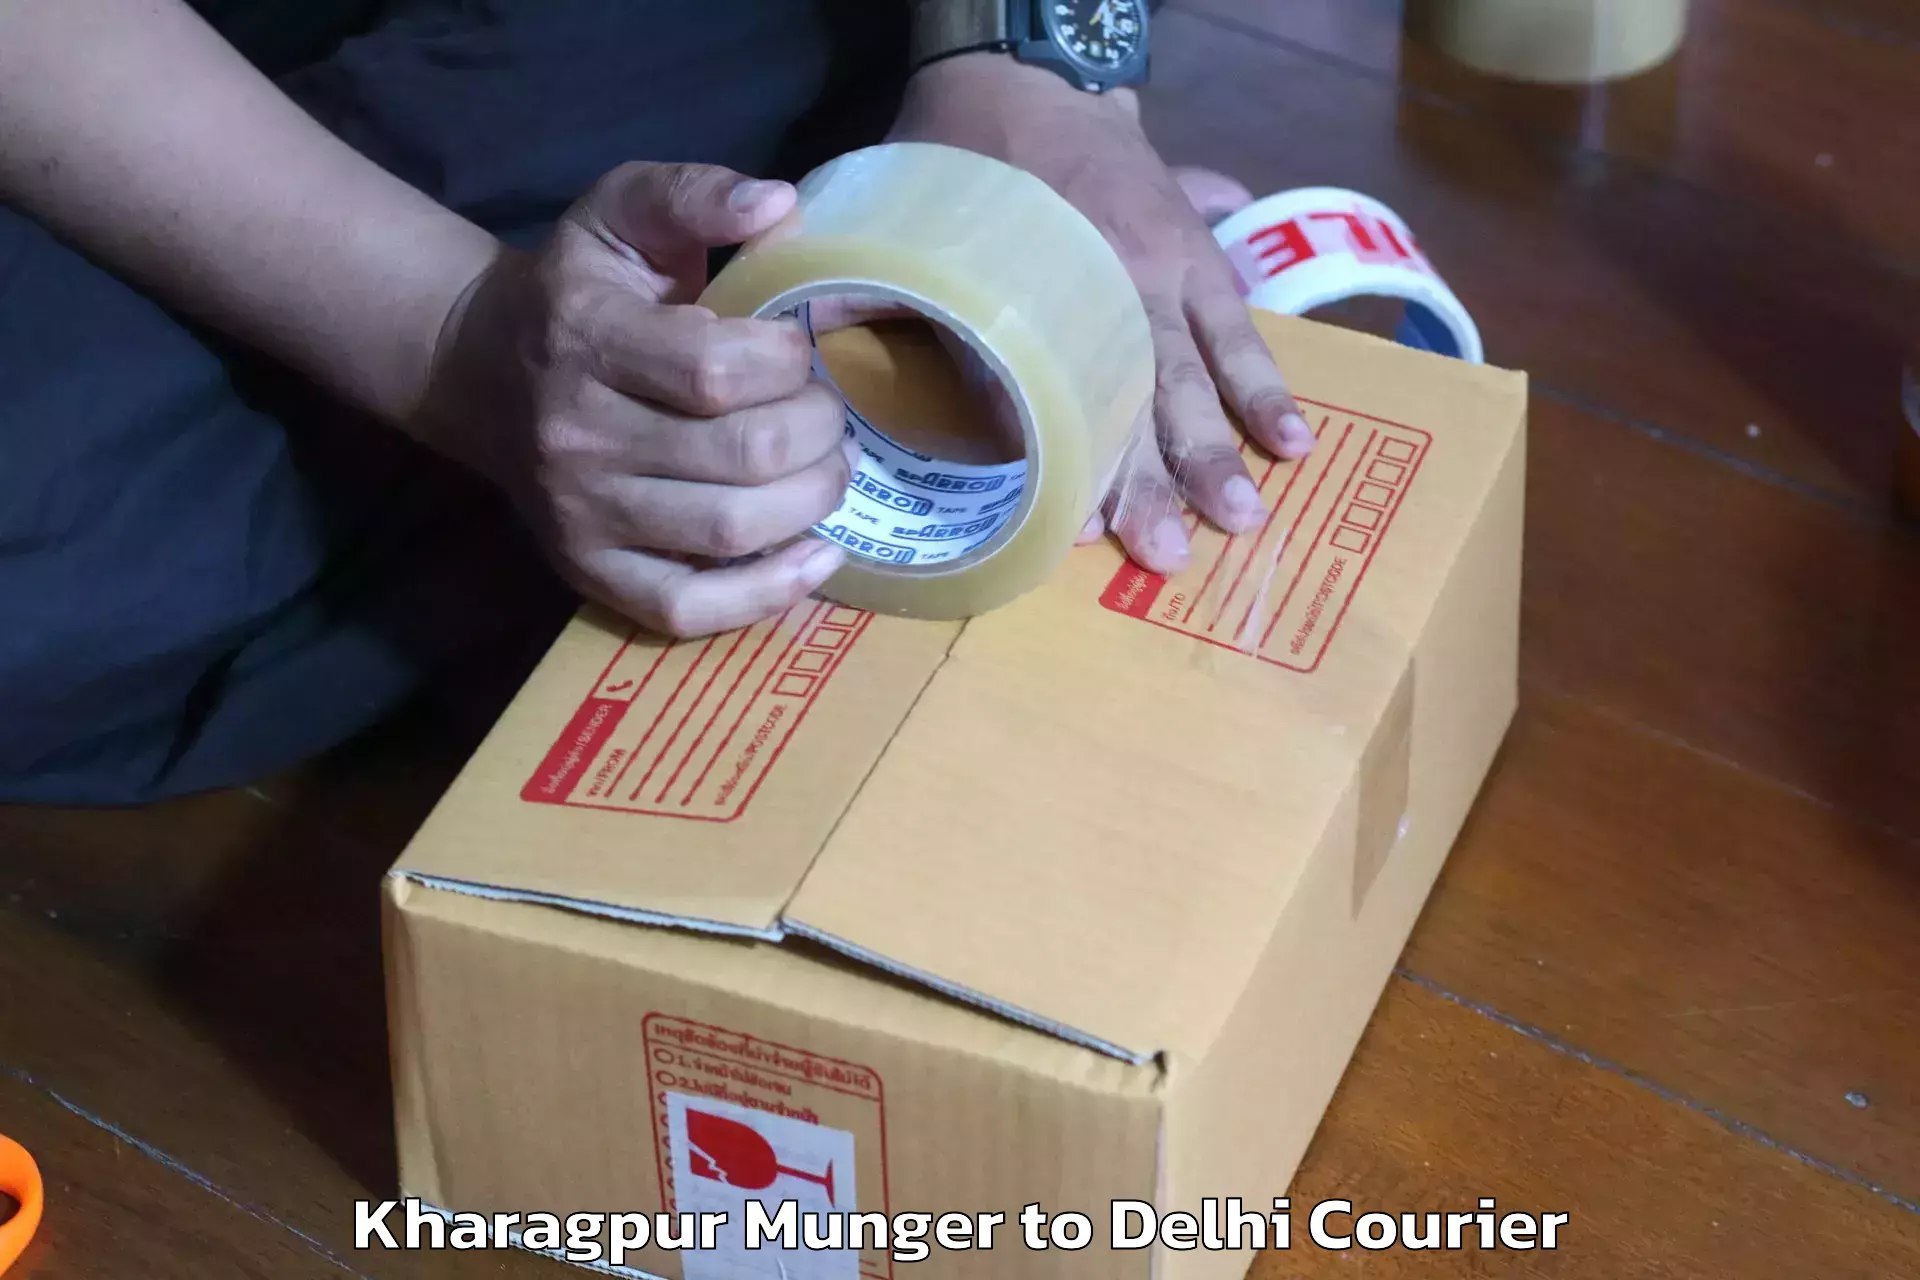 Professional movers and packers Kharagpur Munger to East Delhi